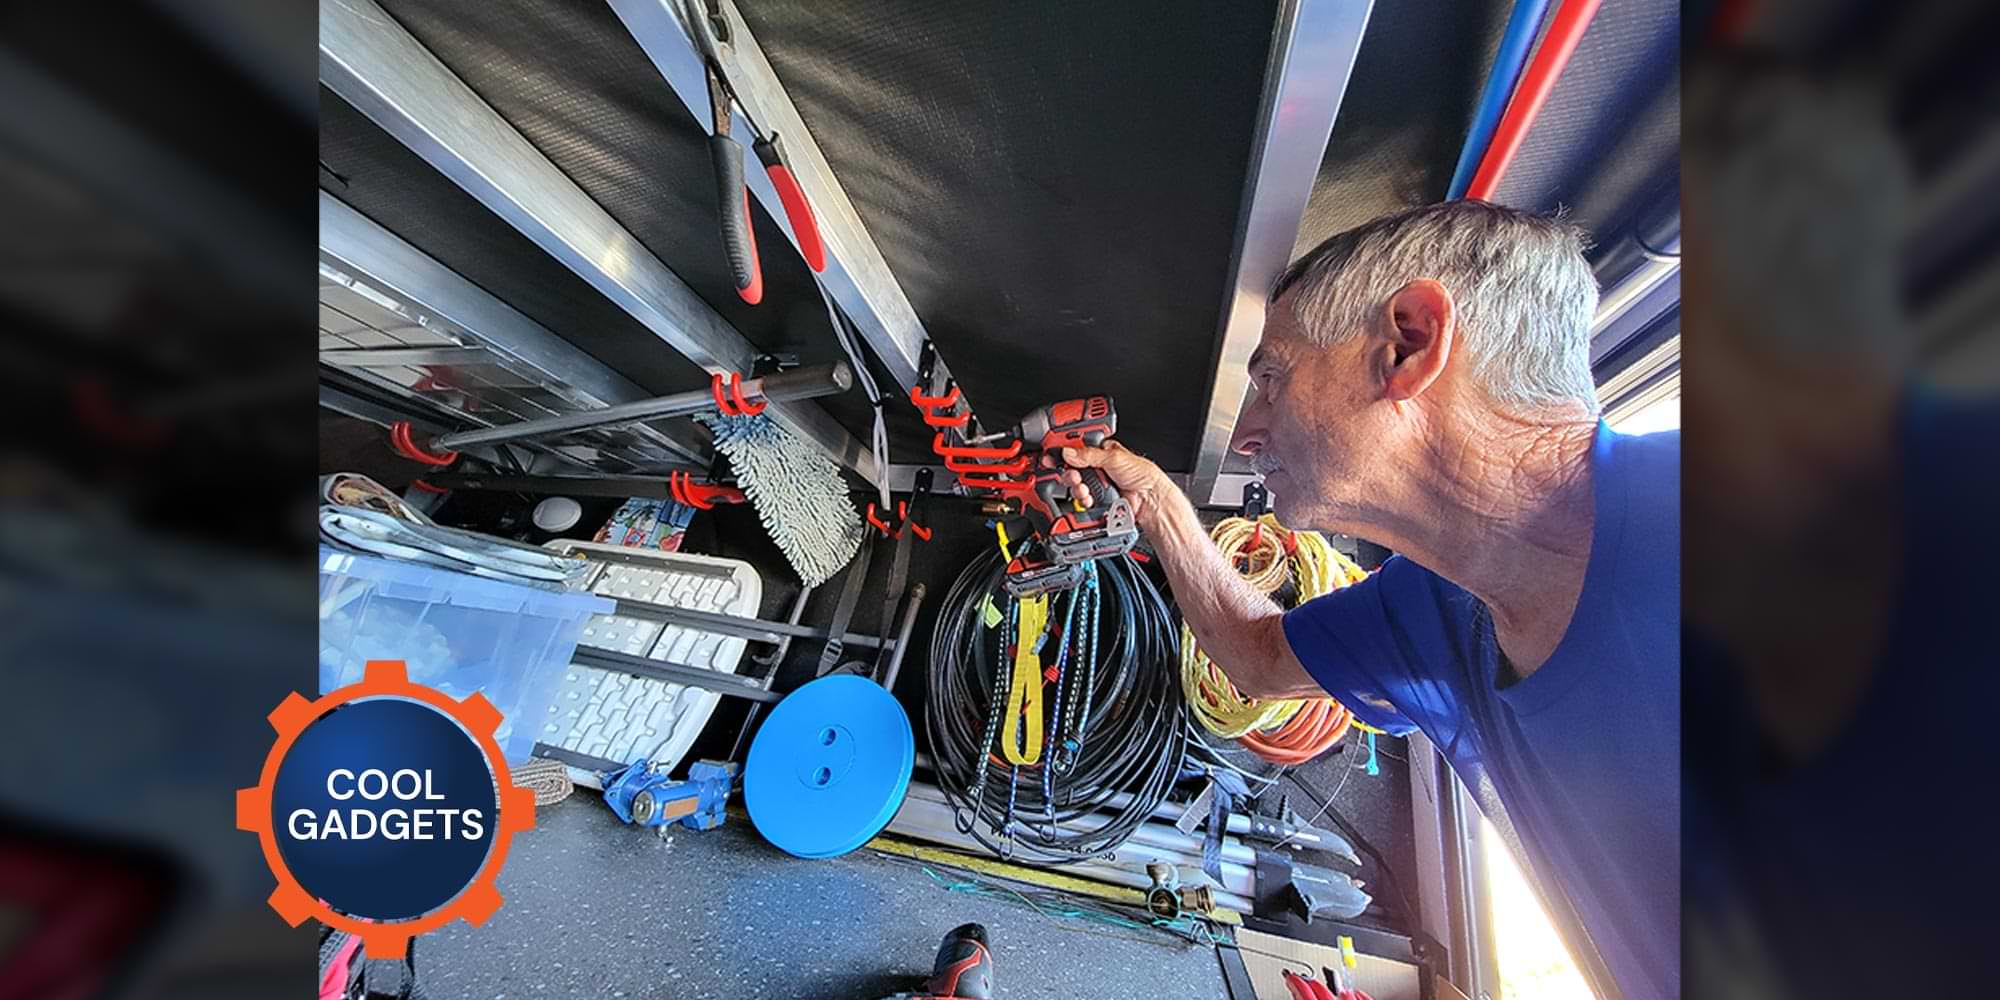 a man leaning into a deep RV external compartment uses a drill to secure a screw on a newly mounted hook